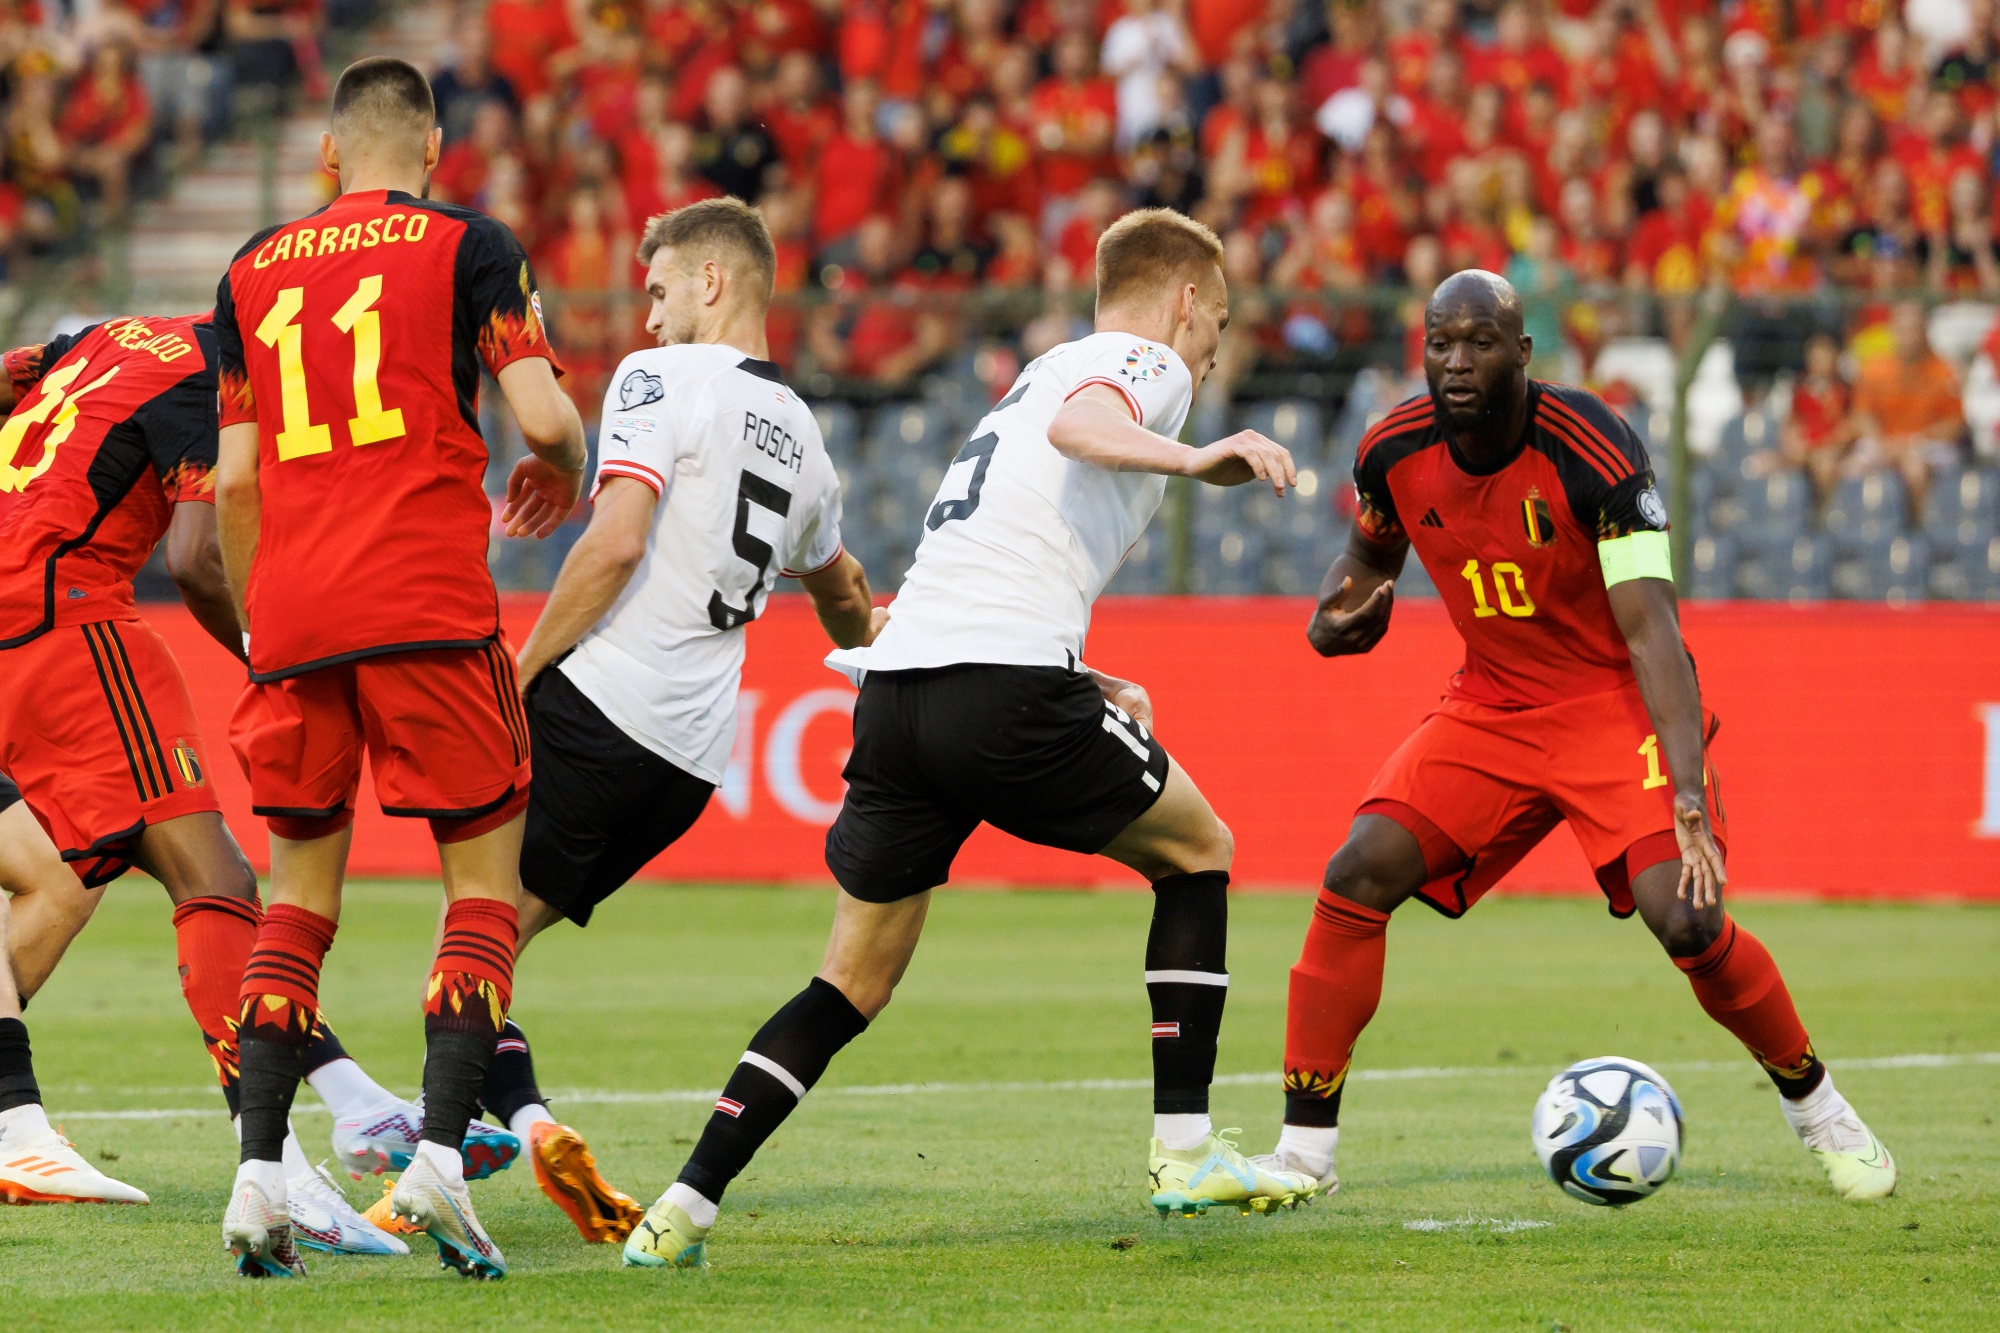 Austria's Stefan Posch and Belgium's Romelu Lukaku fight for the ball during a soccer game between Belgian national team Red Devils and Austria, Saturday 17 June 2023 in Brussels, the second (out of 8) qualification match for the Euro 2024 European Championships. BELGA PHOTO KURT DESPLENTER